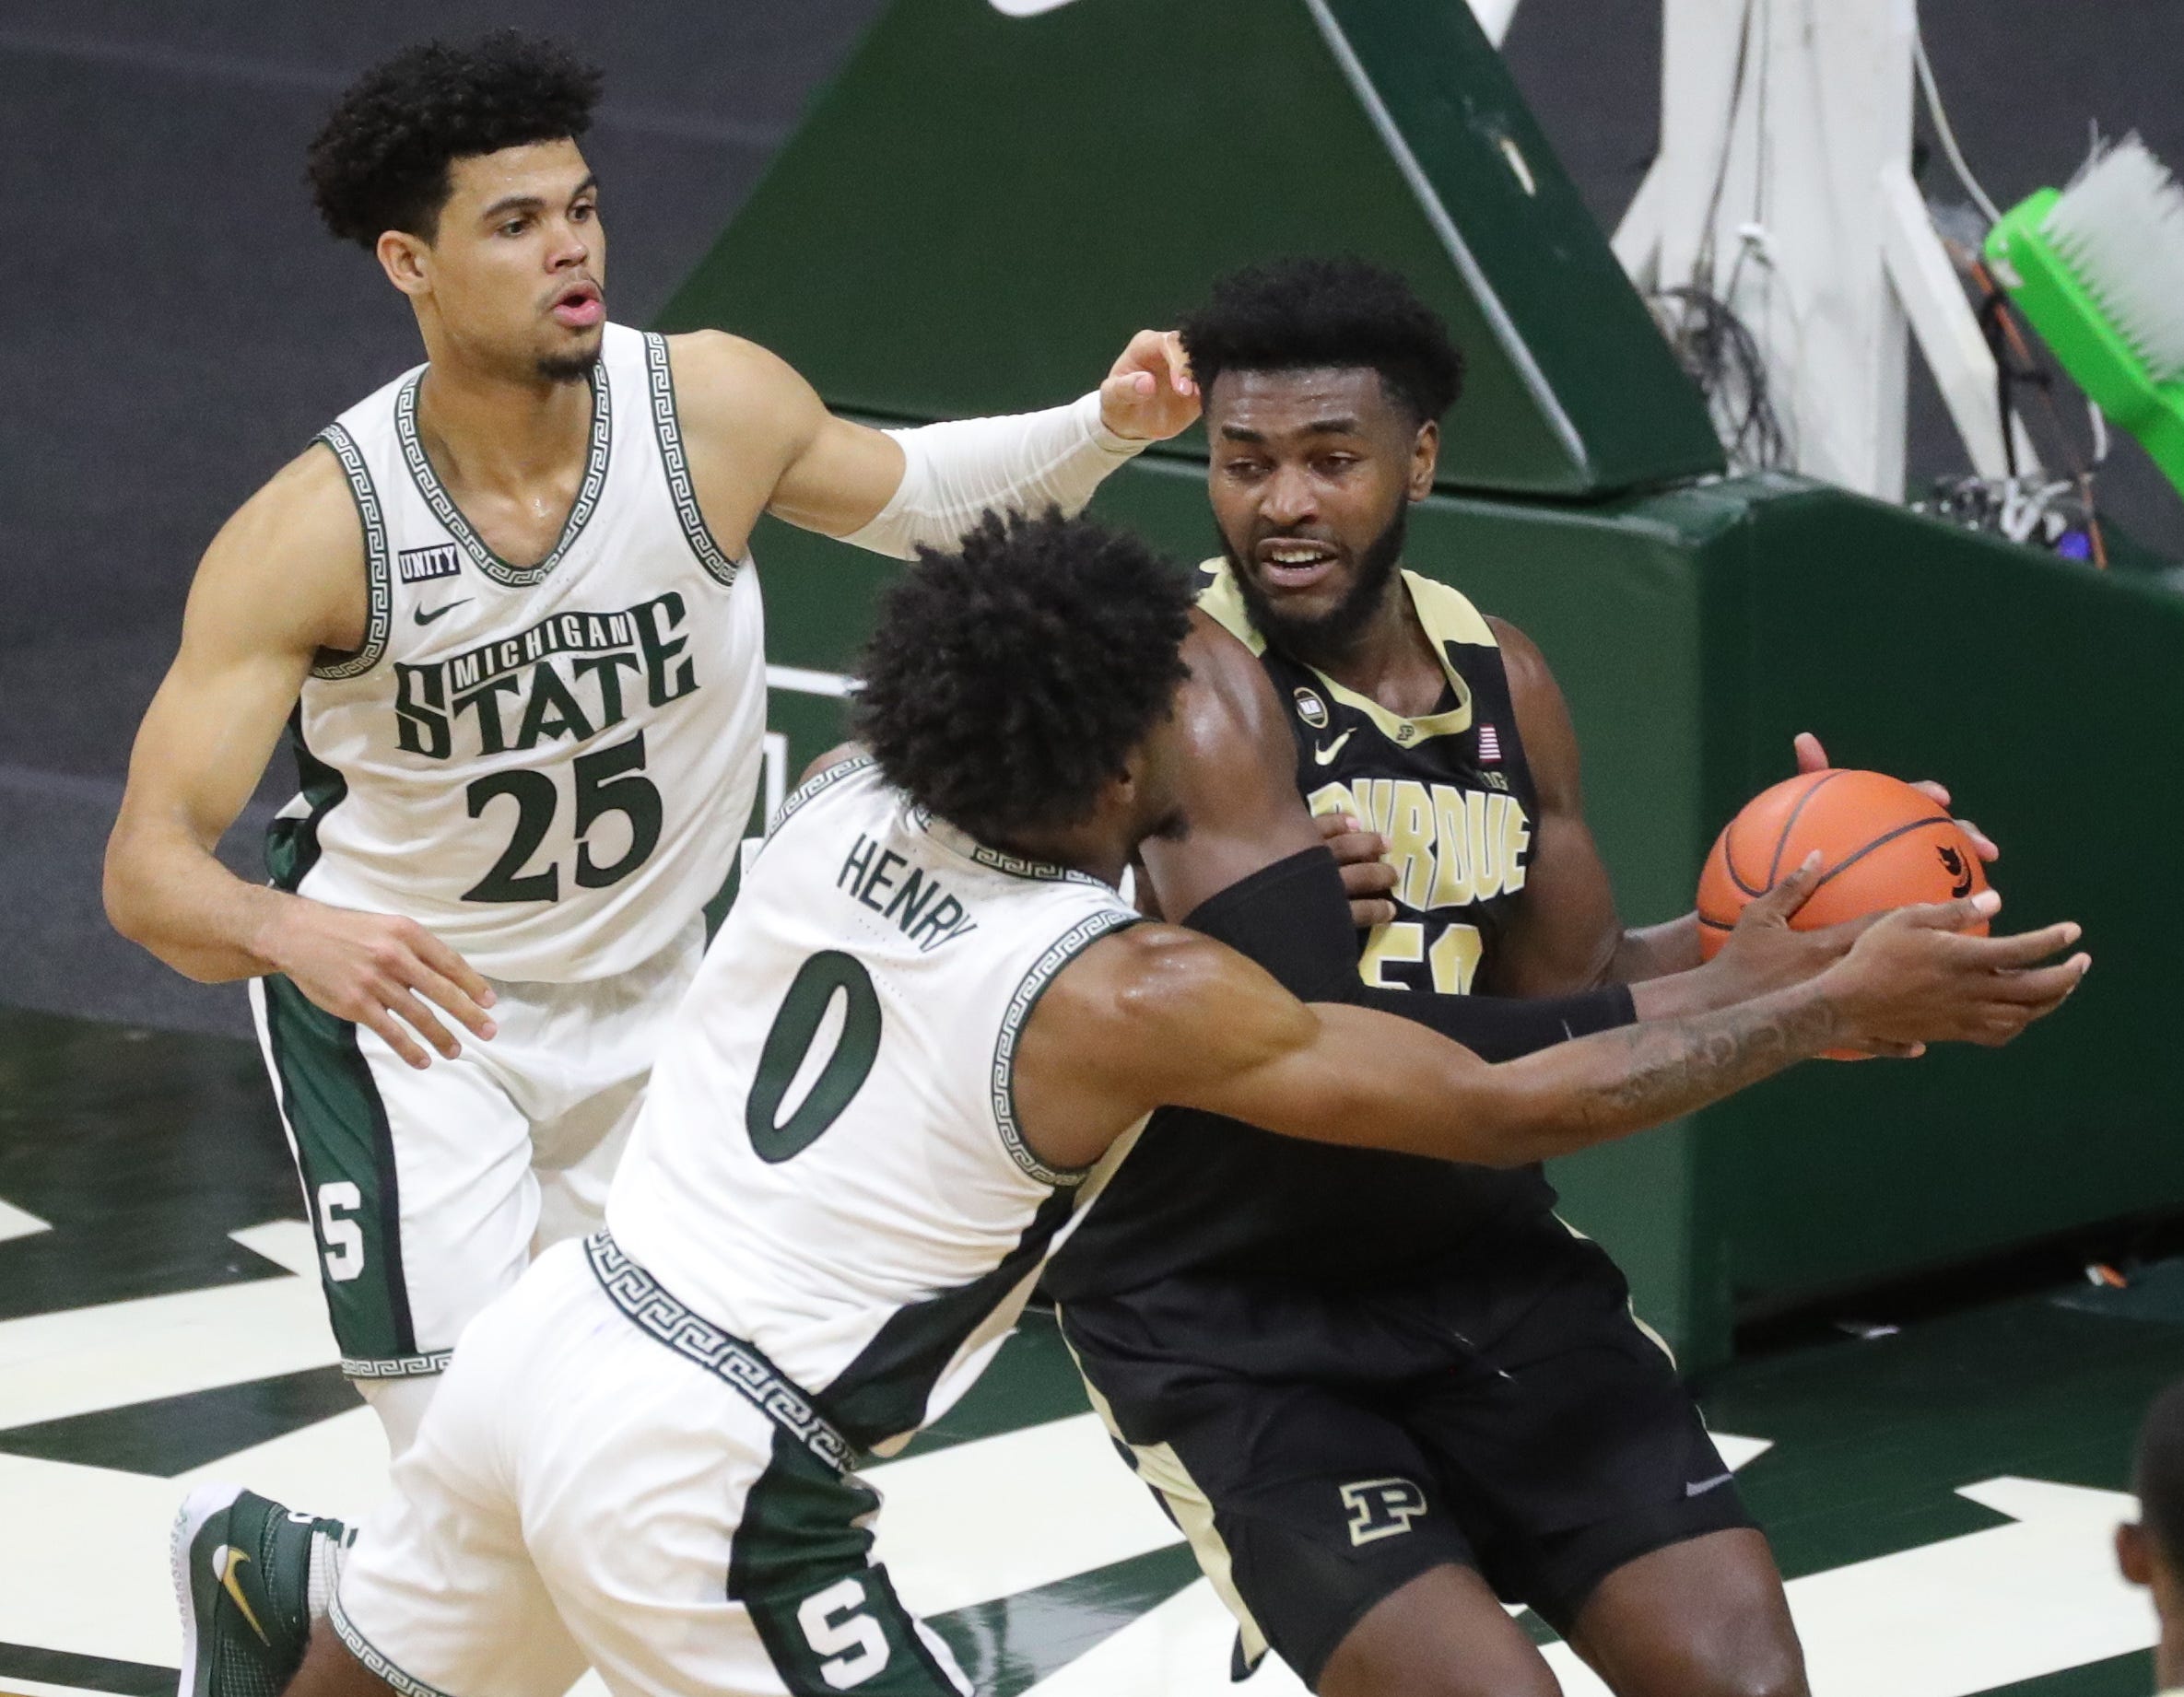 Michigan State Spartans striker Malik Hall (25) and Aaron Henry defend Purdue Boilermakers striker Trevion Williams during the second half at Priceline Center in East Lansing, Friday, Jan.8, 2021.